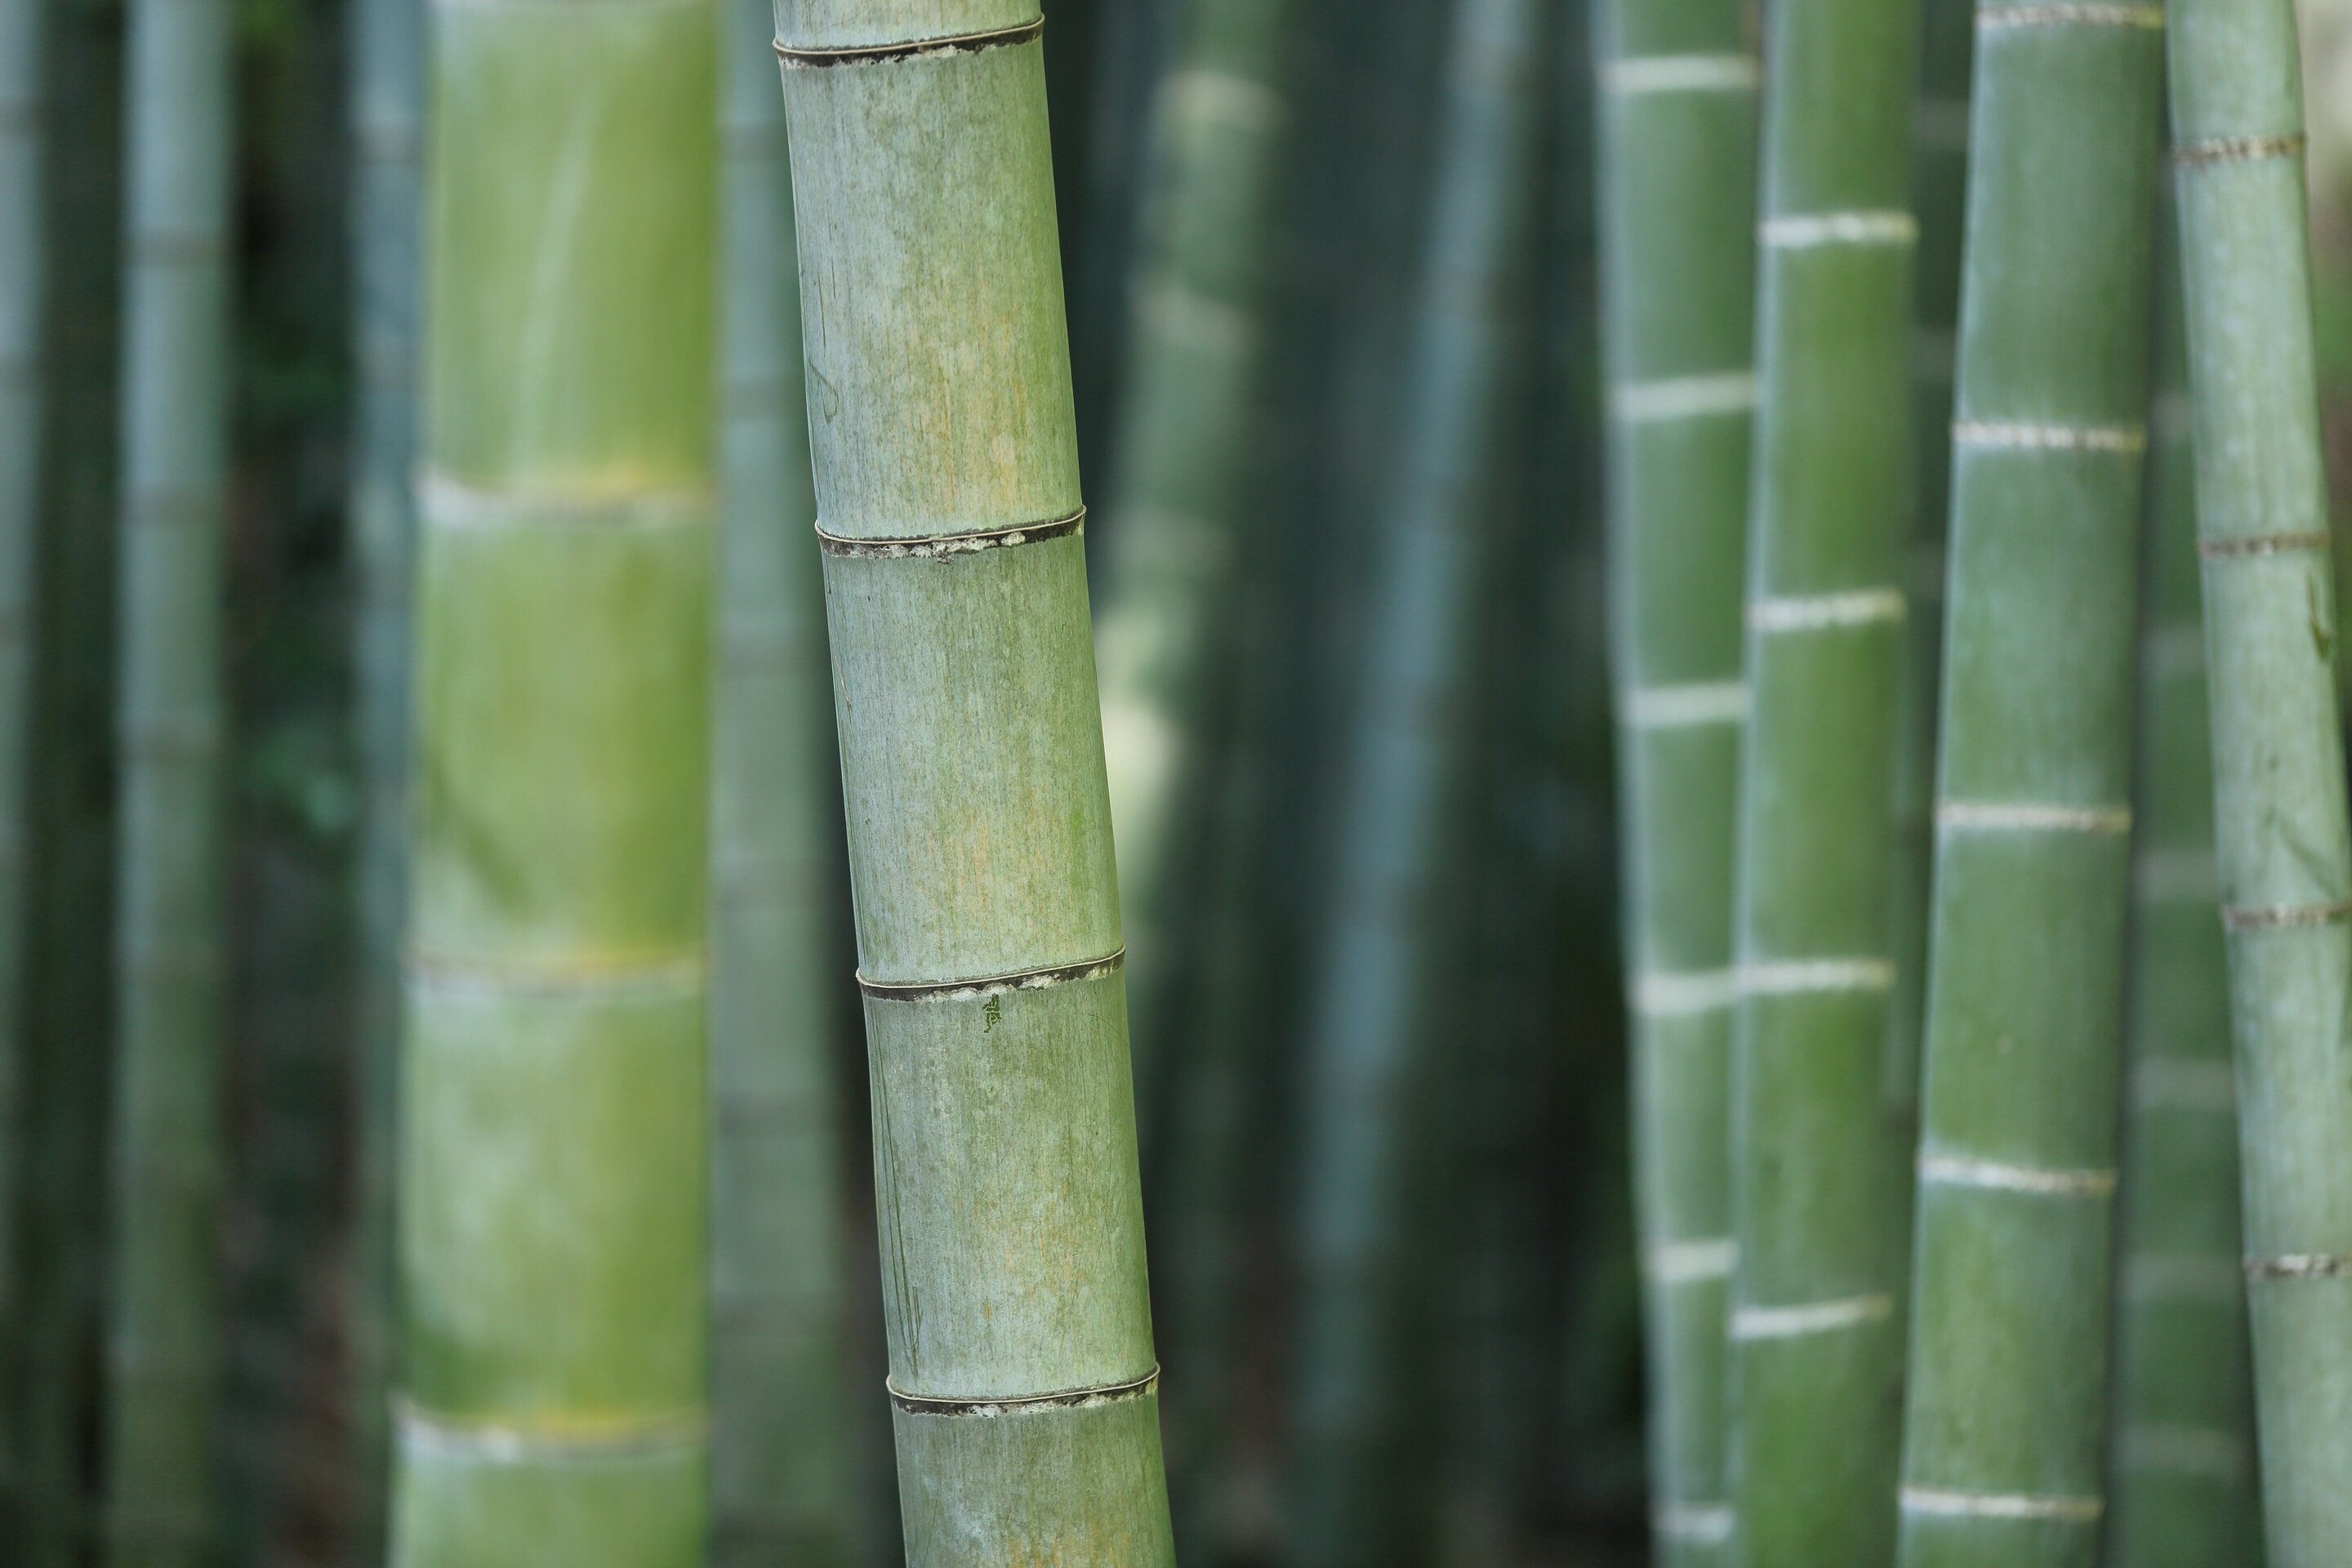 Visualizing Heat Flow in Bamboo Could Help Design More Energy-Efficient and Fire-Safe Buildings